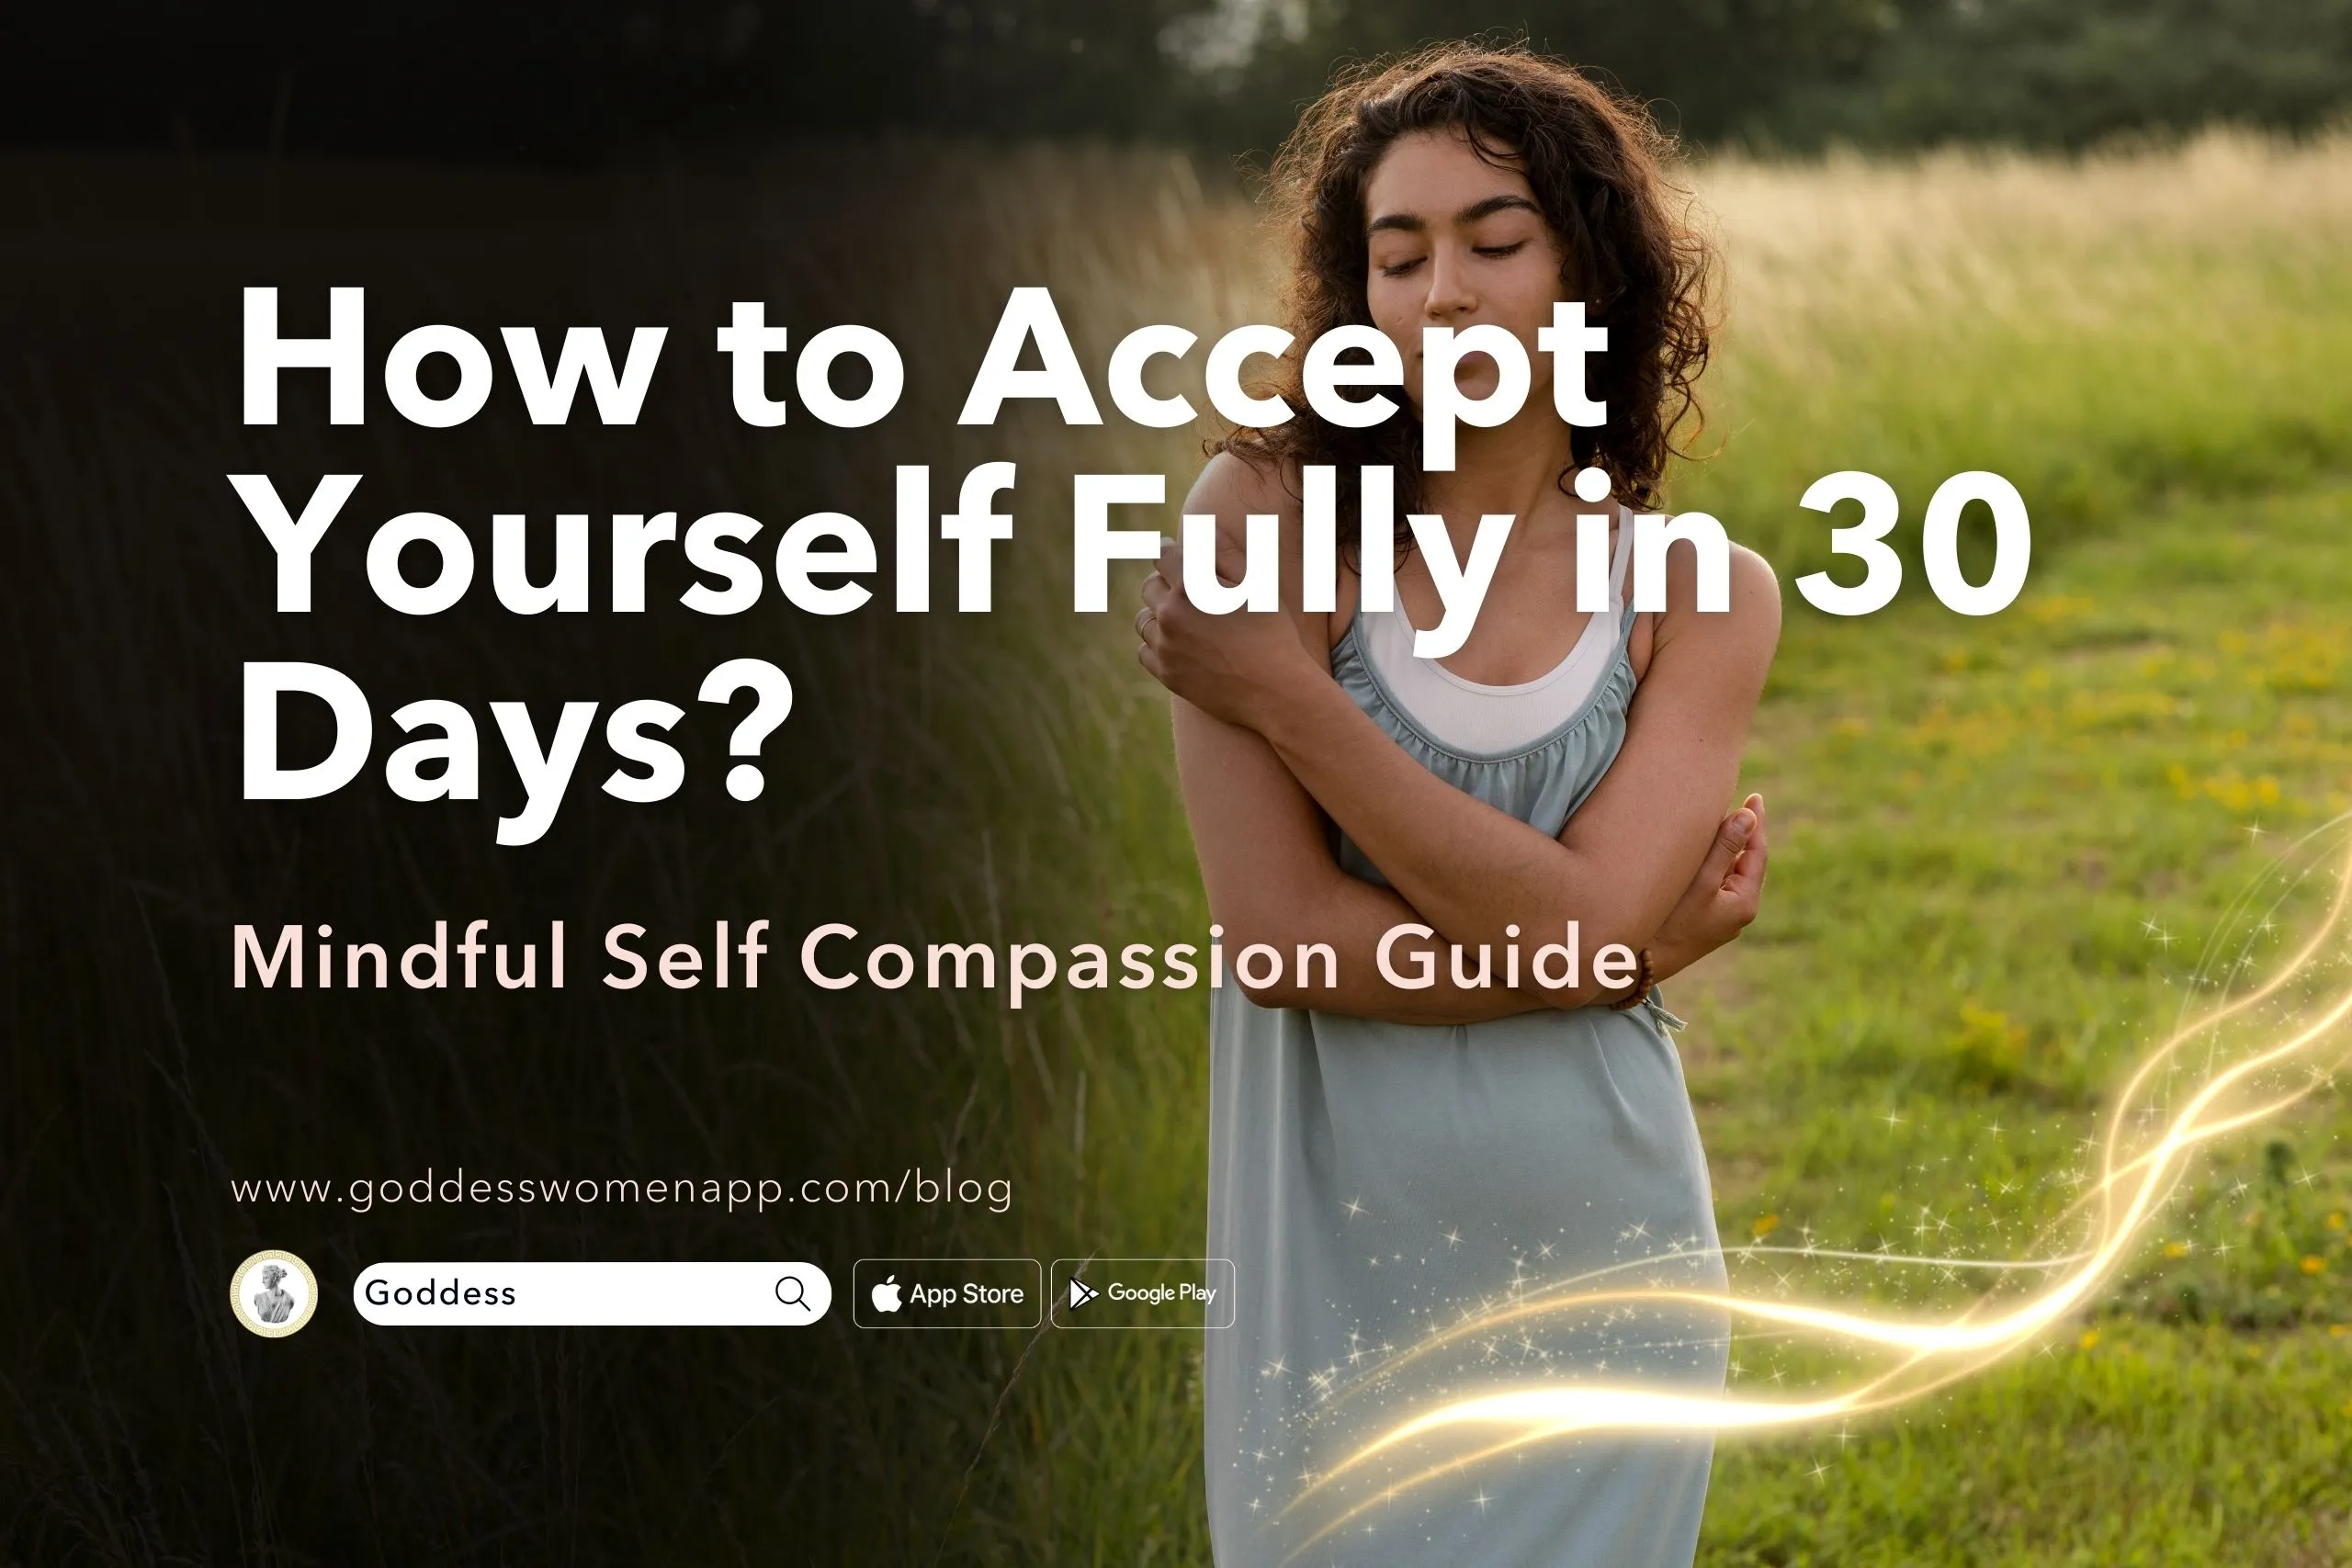 Mindful Self Compassion: How to Embrace Yourself Fully in 30 Days